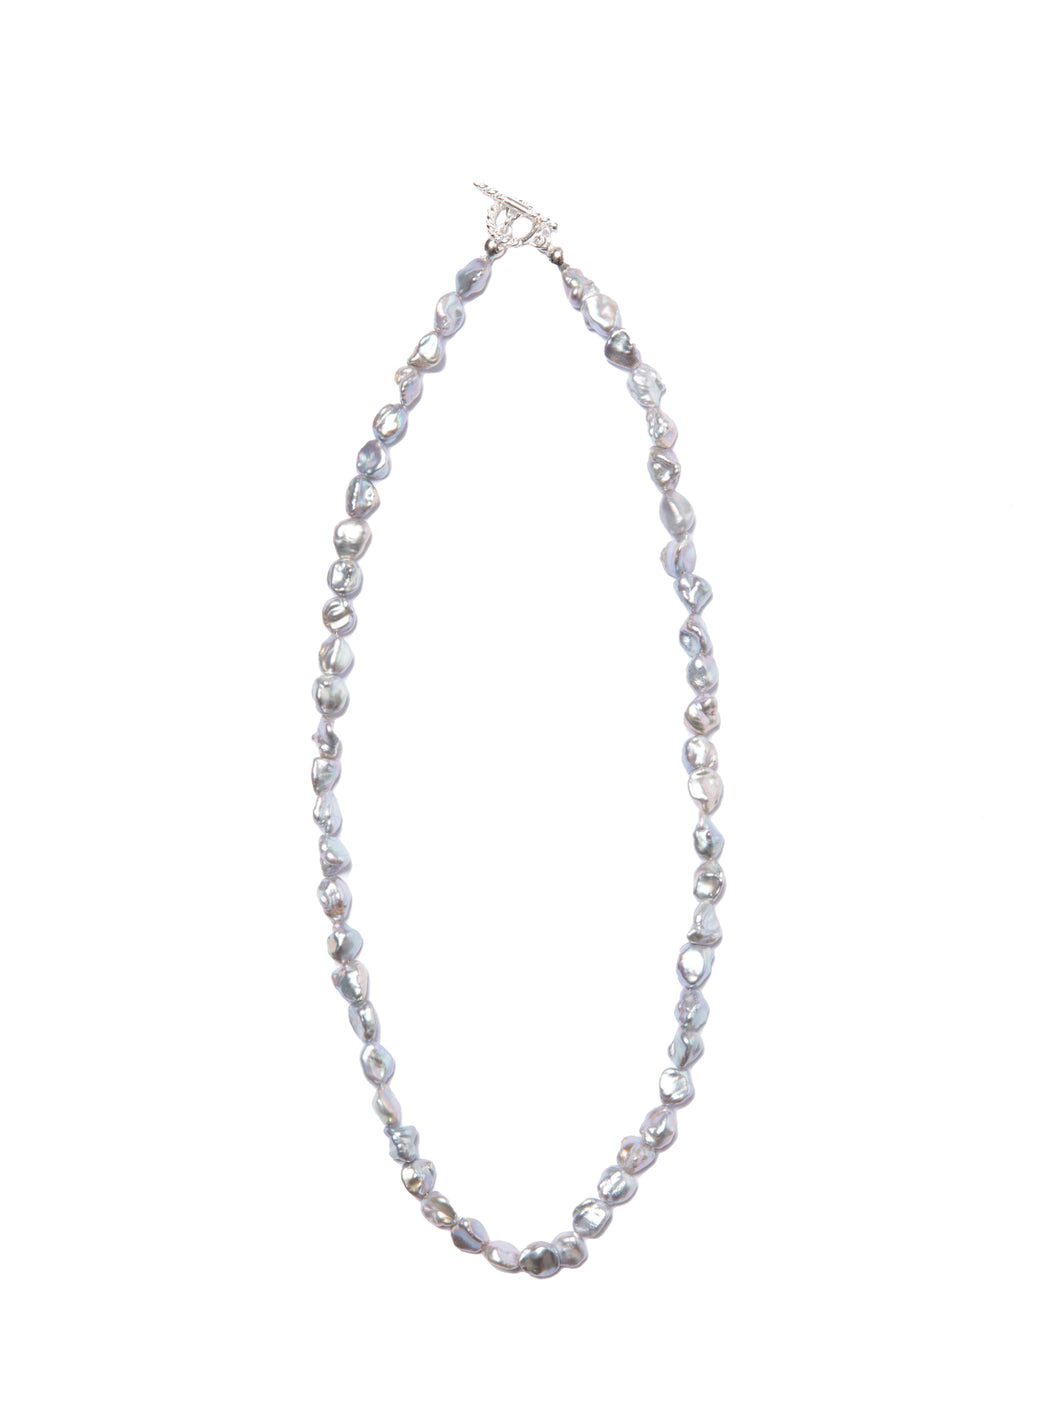 Distortion Pearl Necklace